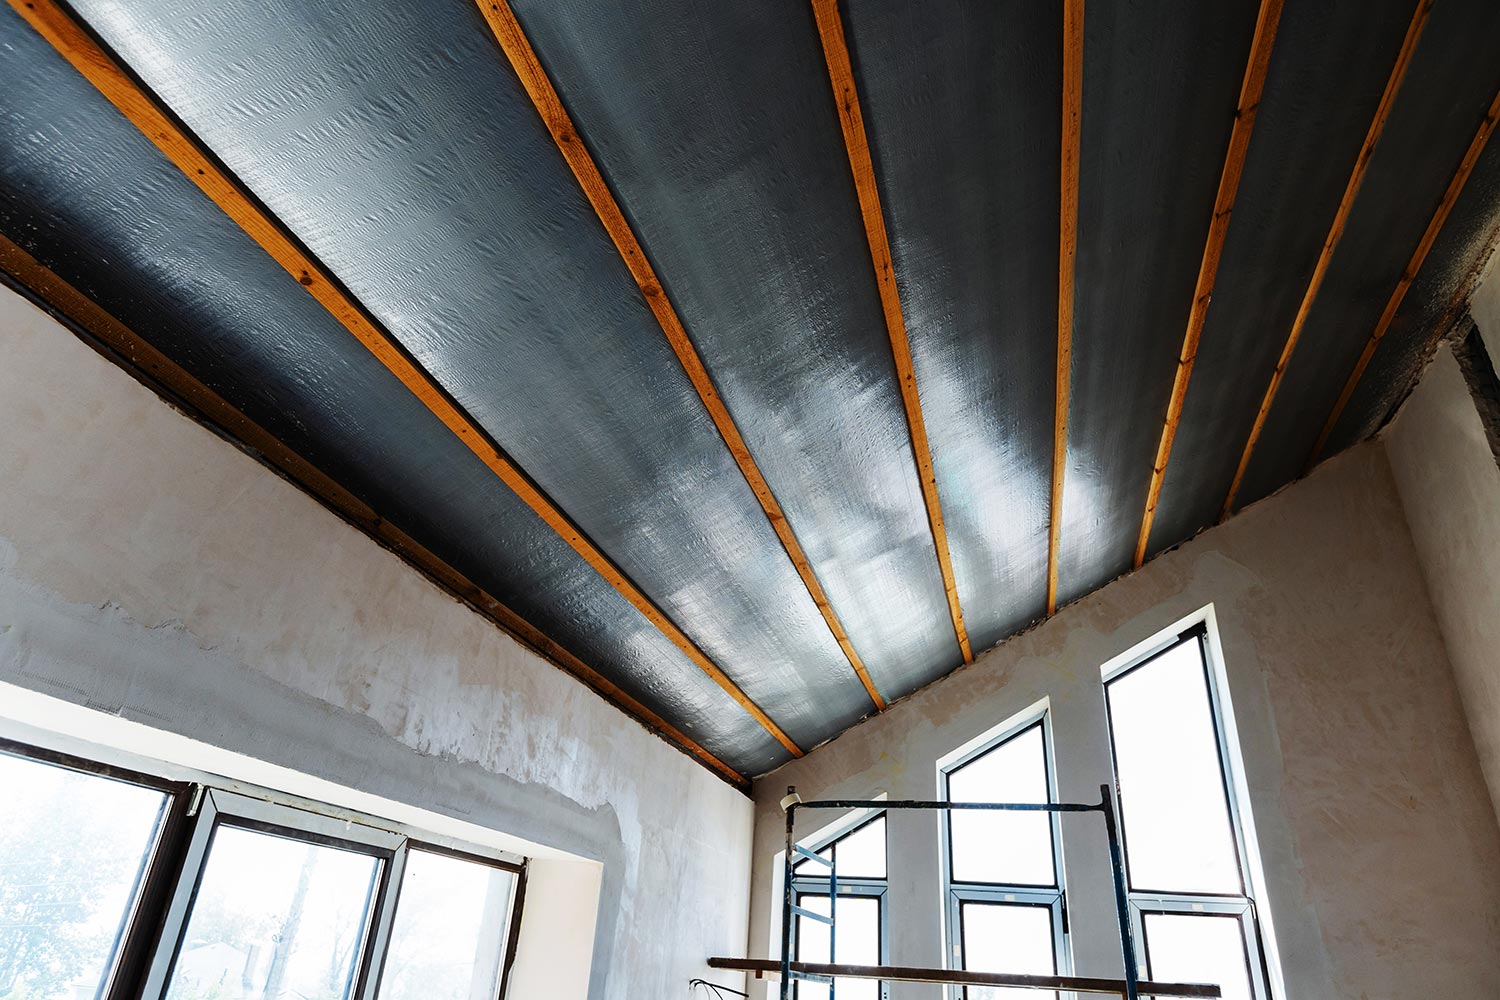 Sheathing with heat-insulating materials of the inner surface of the ceiling